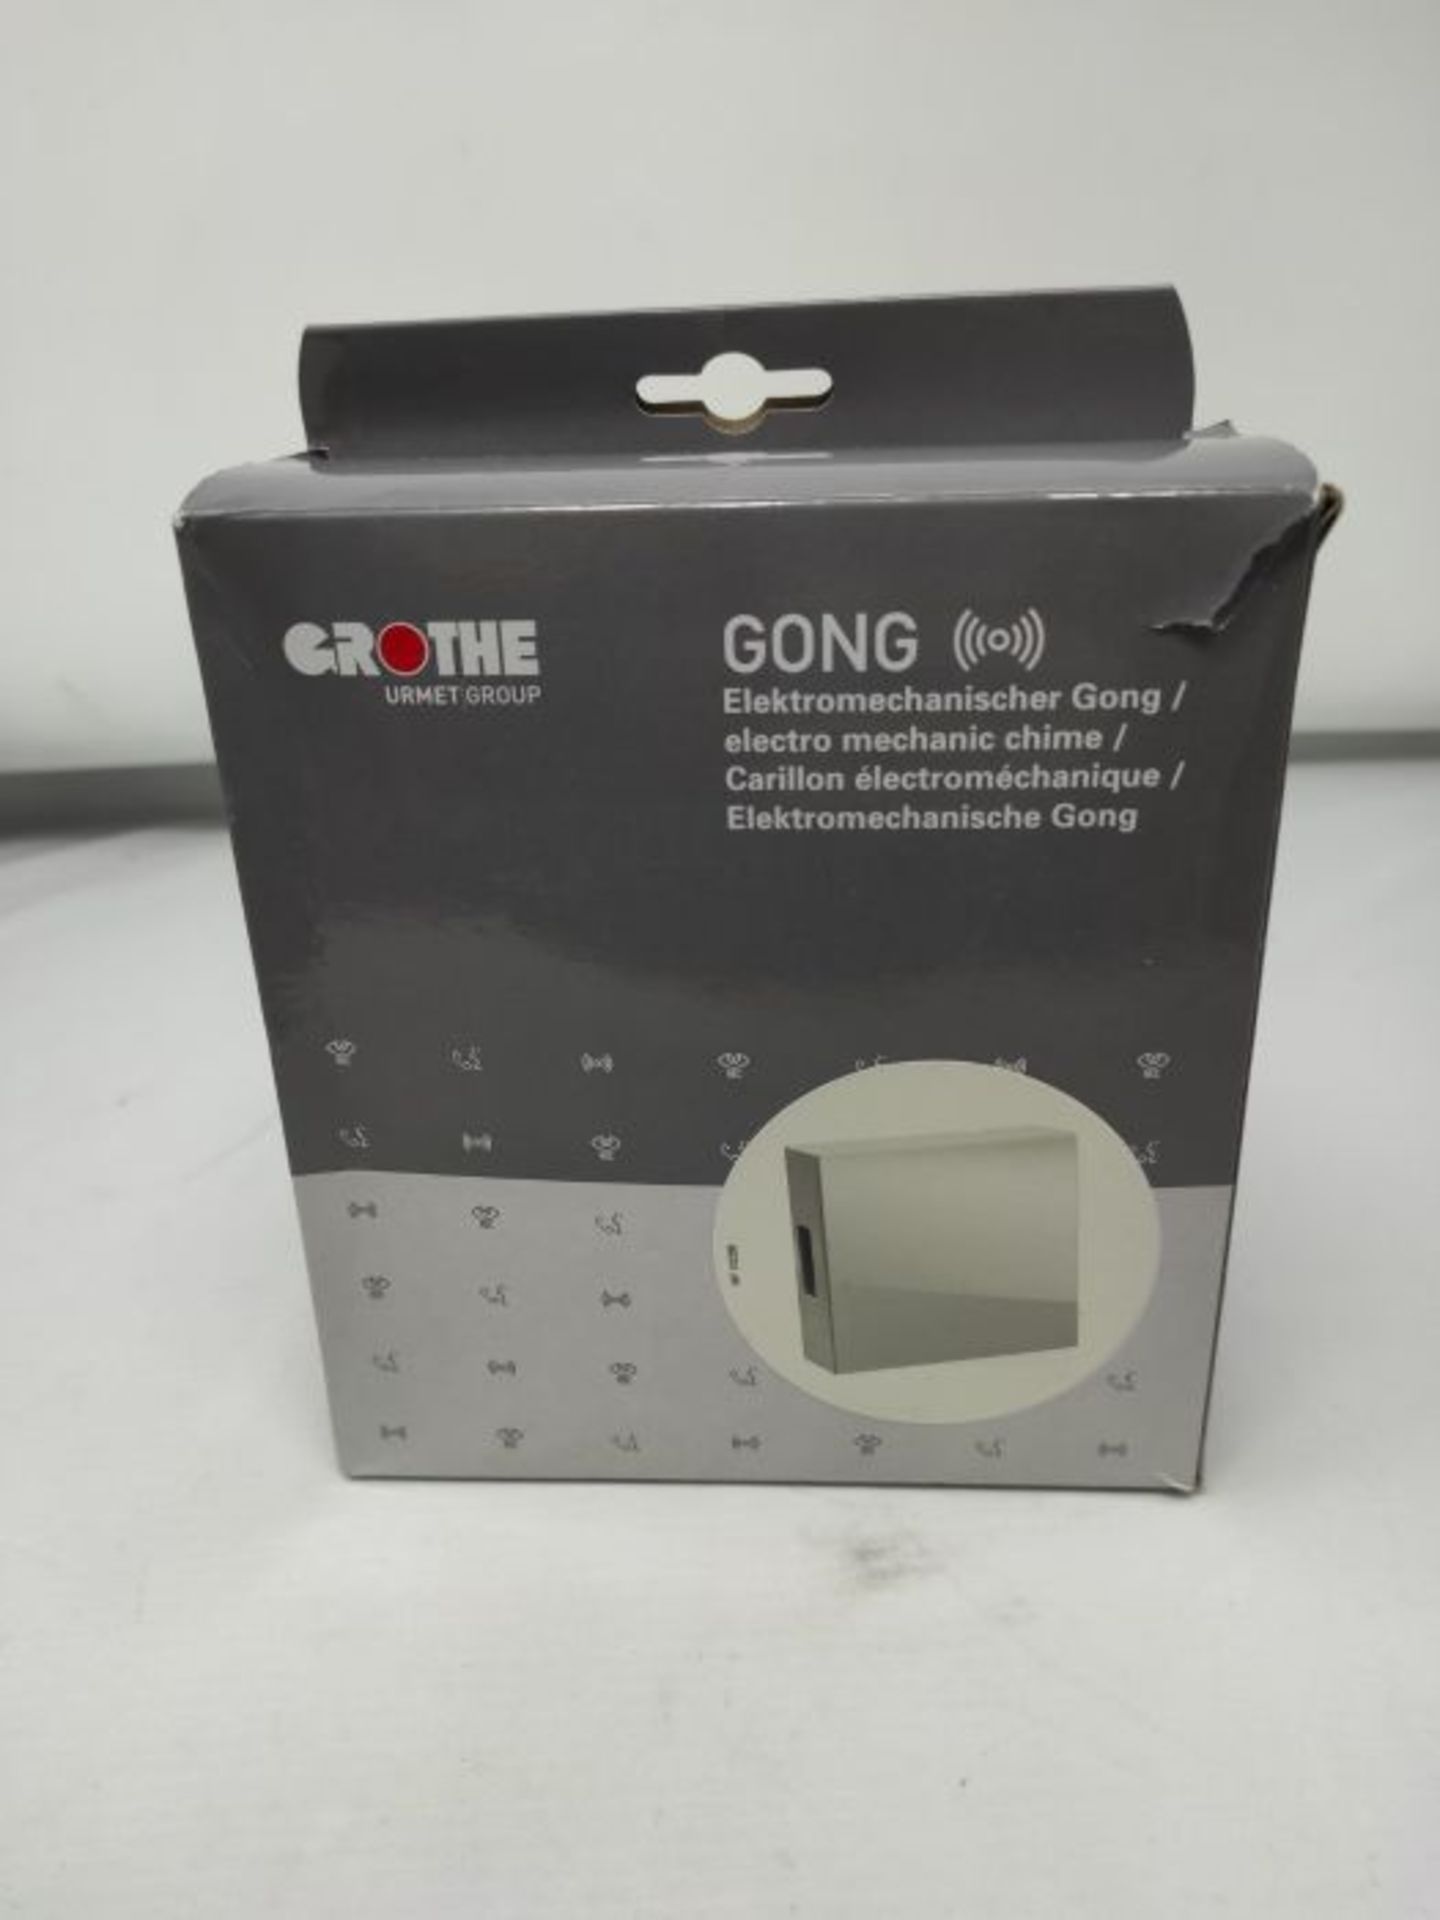 Unitec Grothe Gong Luna 47223 Doorbell with Glass Panel - Two-Tone Ring - Image 2 of 3